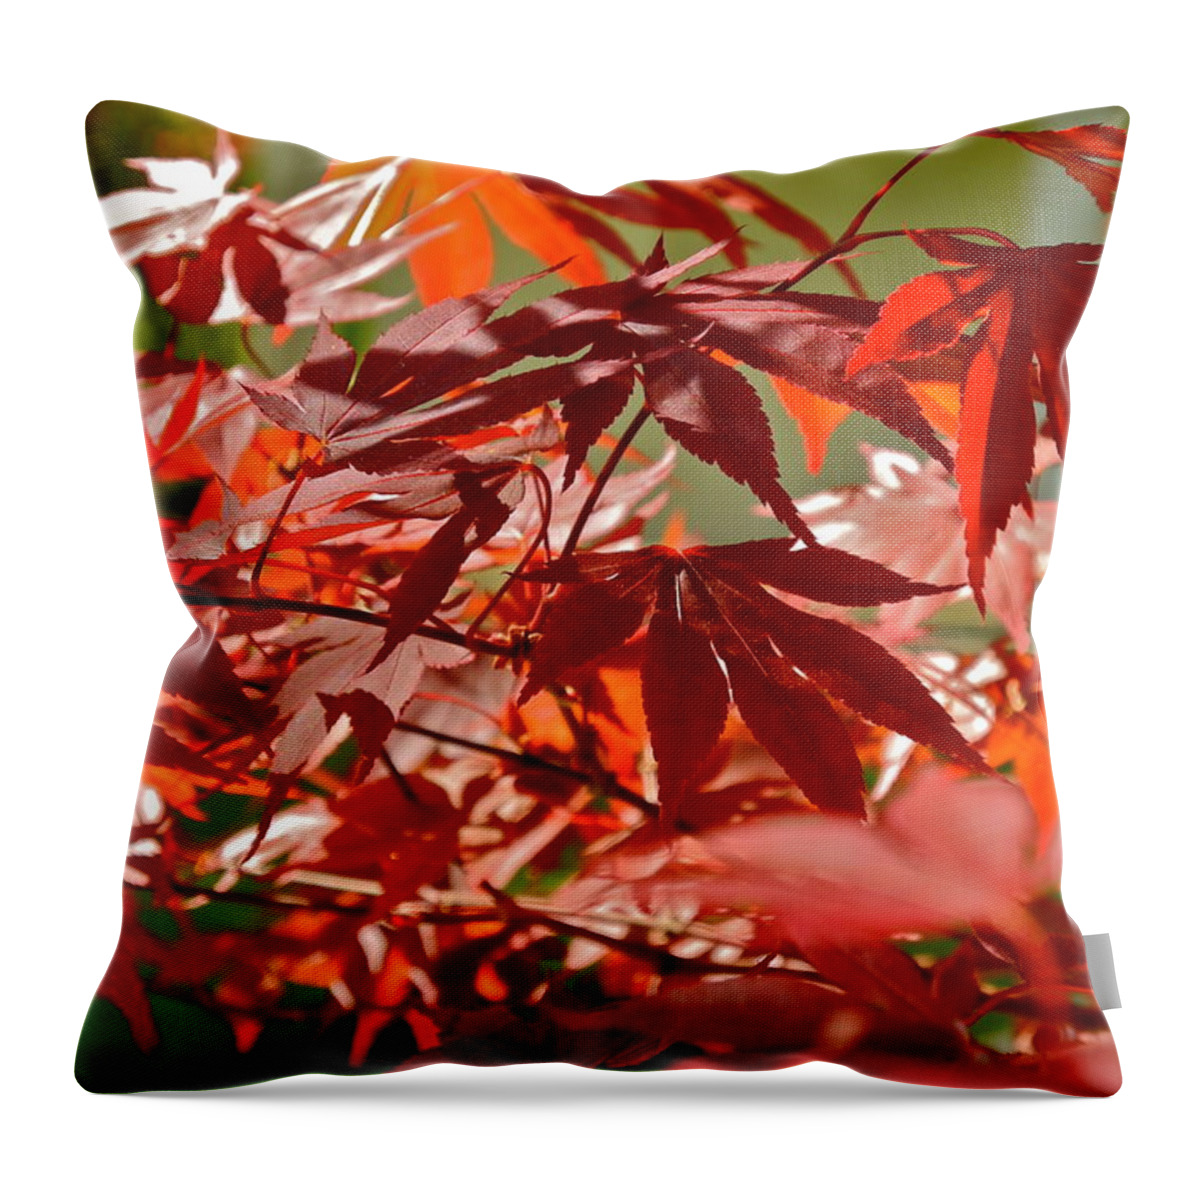 Japanese Red Leaf Maple Throw Pillow featuring the photograph Japanese Red Leaf Maple by Kirsten Giving